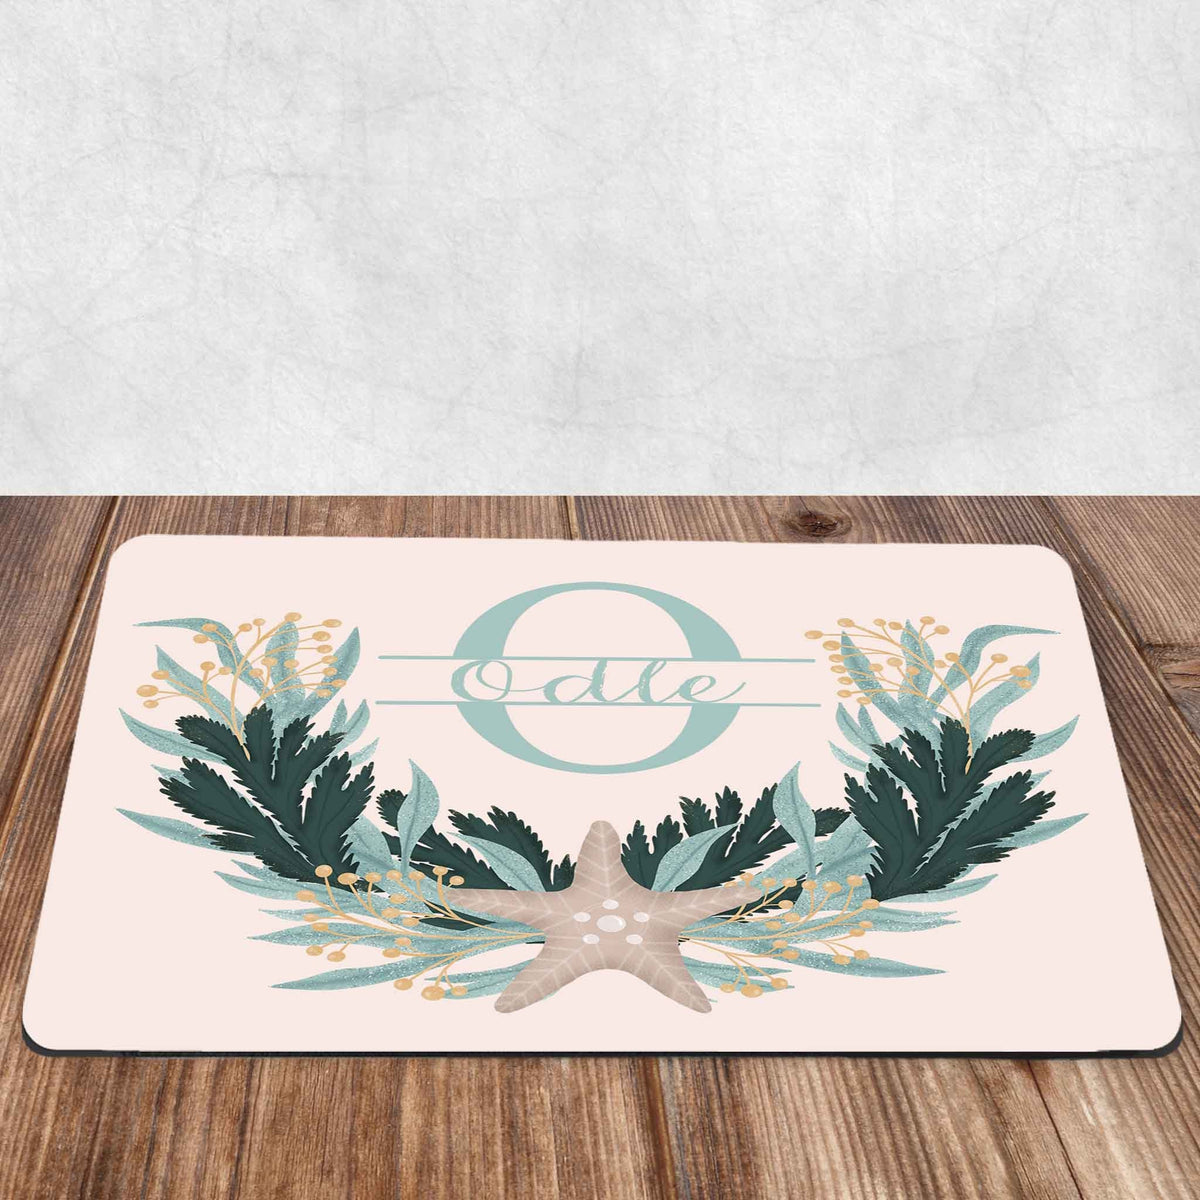 Custom Placemats | Personalized Dining and Serving | Coastal Christmas